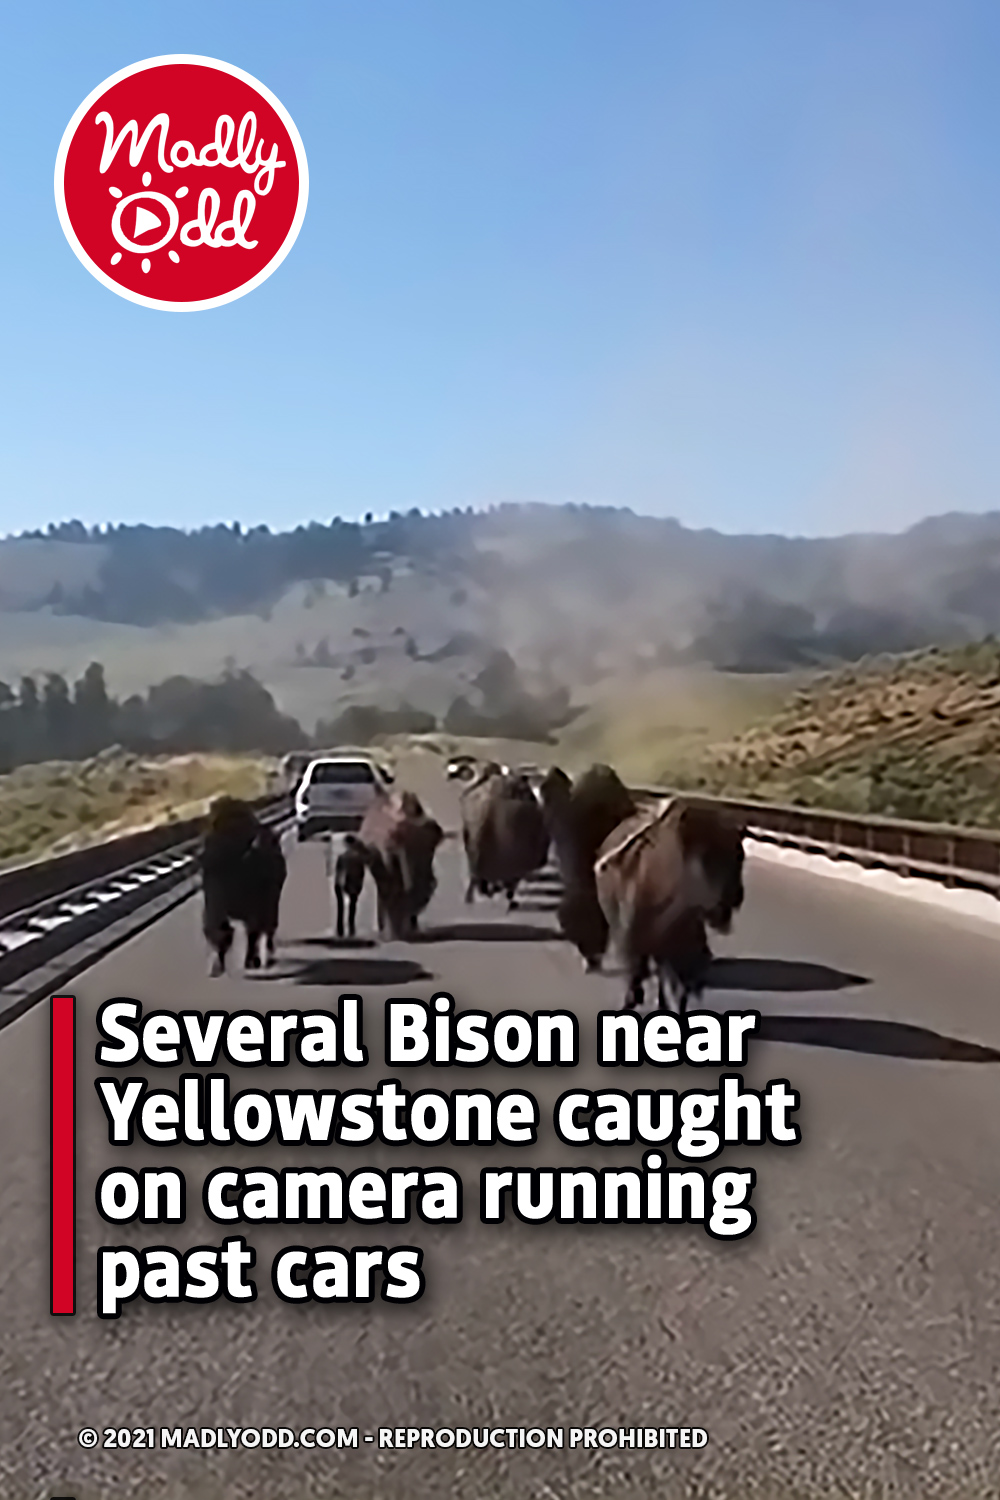 Several Bison near Yellowstone caught on camera running past cars